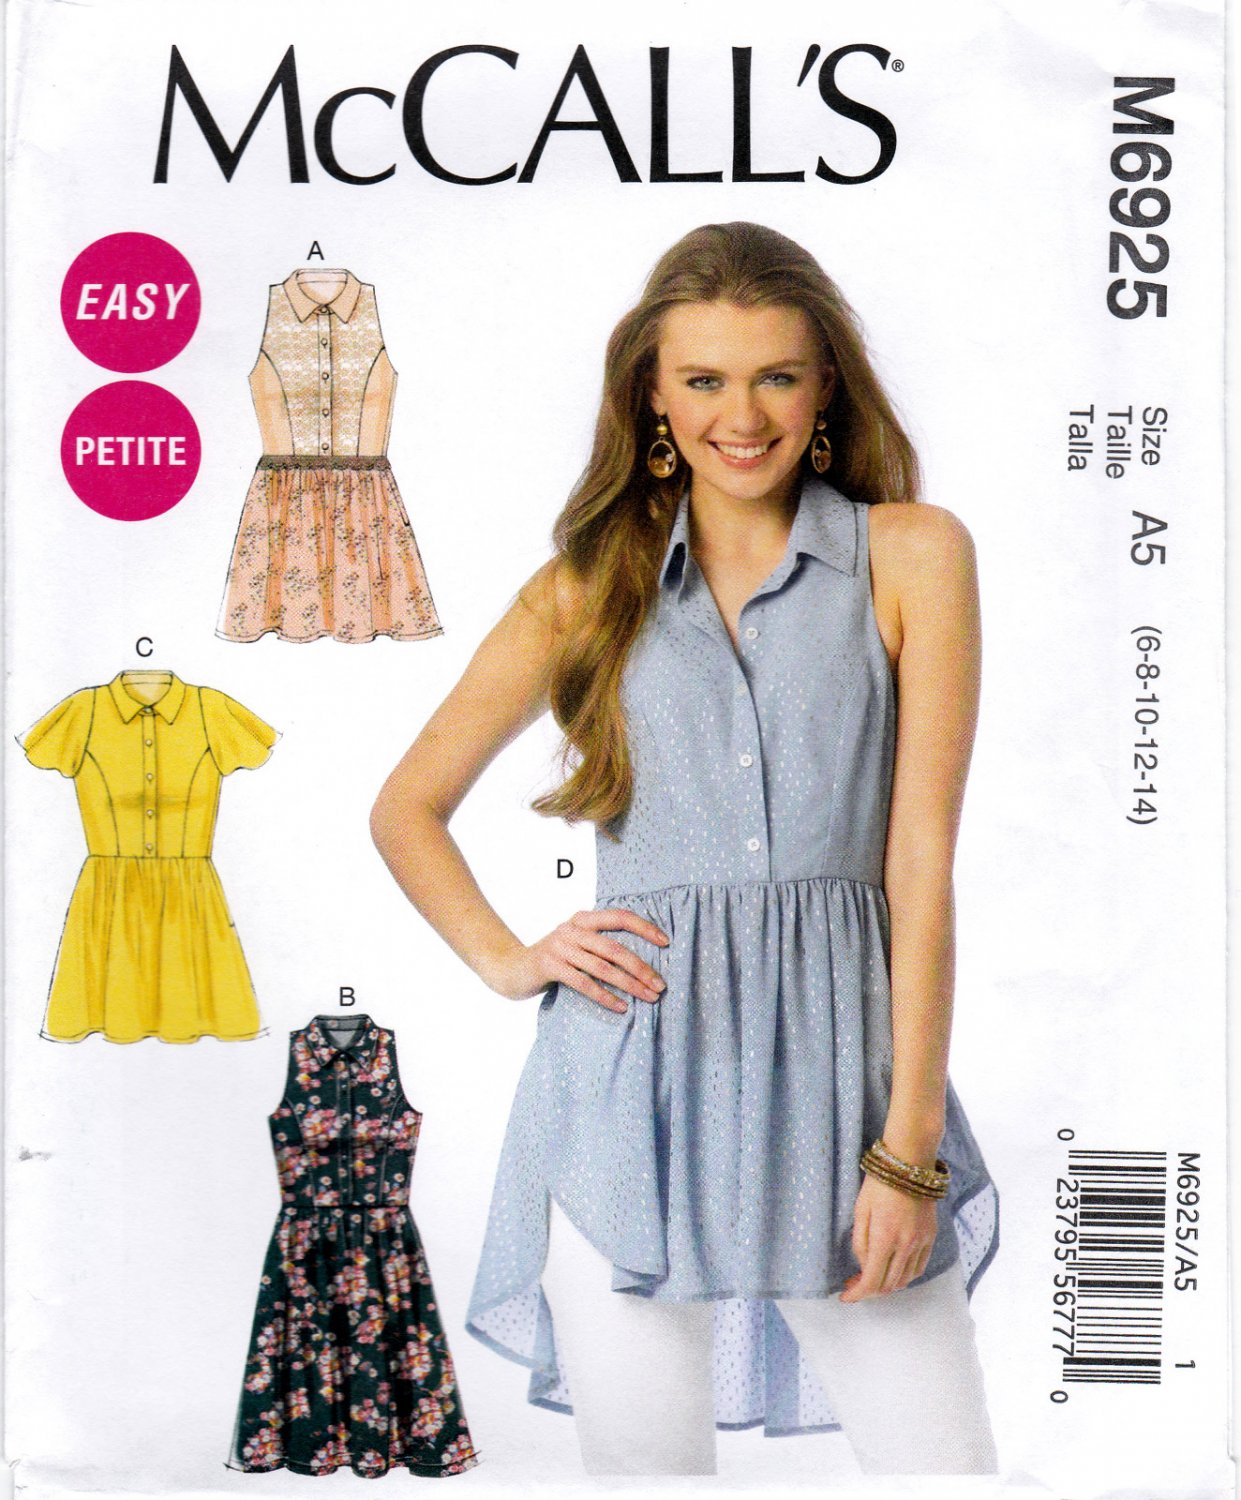 McCall's M6925 6925 Misses Petite Tops Tunic Dress Easy Sewing Pattern Sizes 6-8-10-12-14